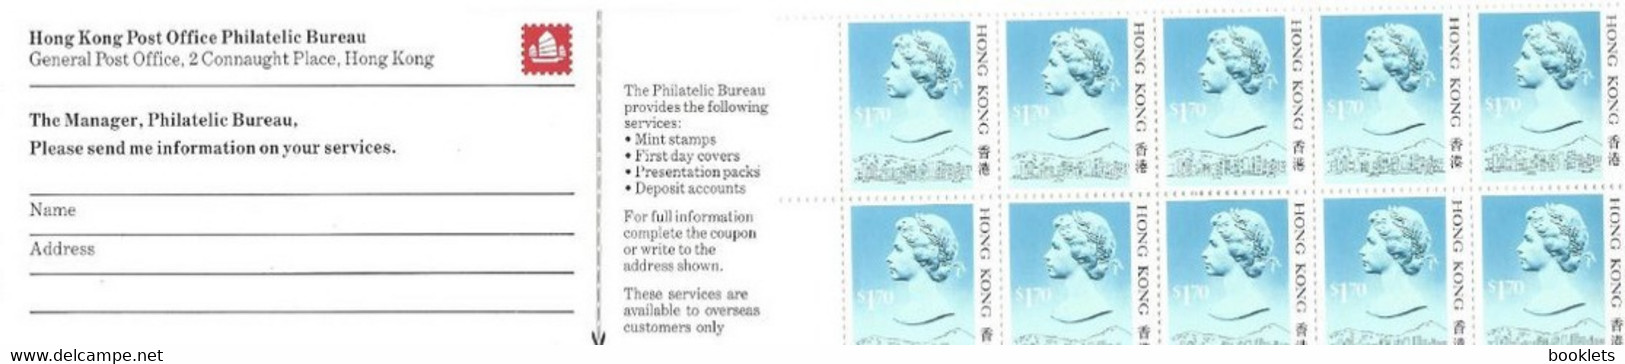 HONGKONG, Booklet 18a 1, 1987, 10x$1.70 Elizabeth Blue, Margin About 3 Cm From The Fold - Carnets